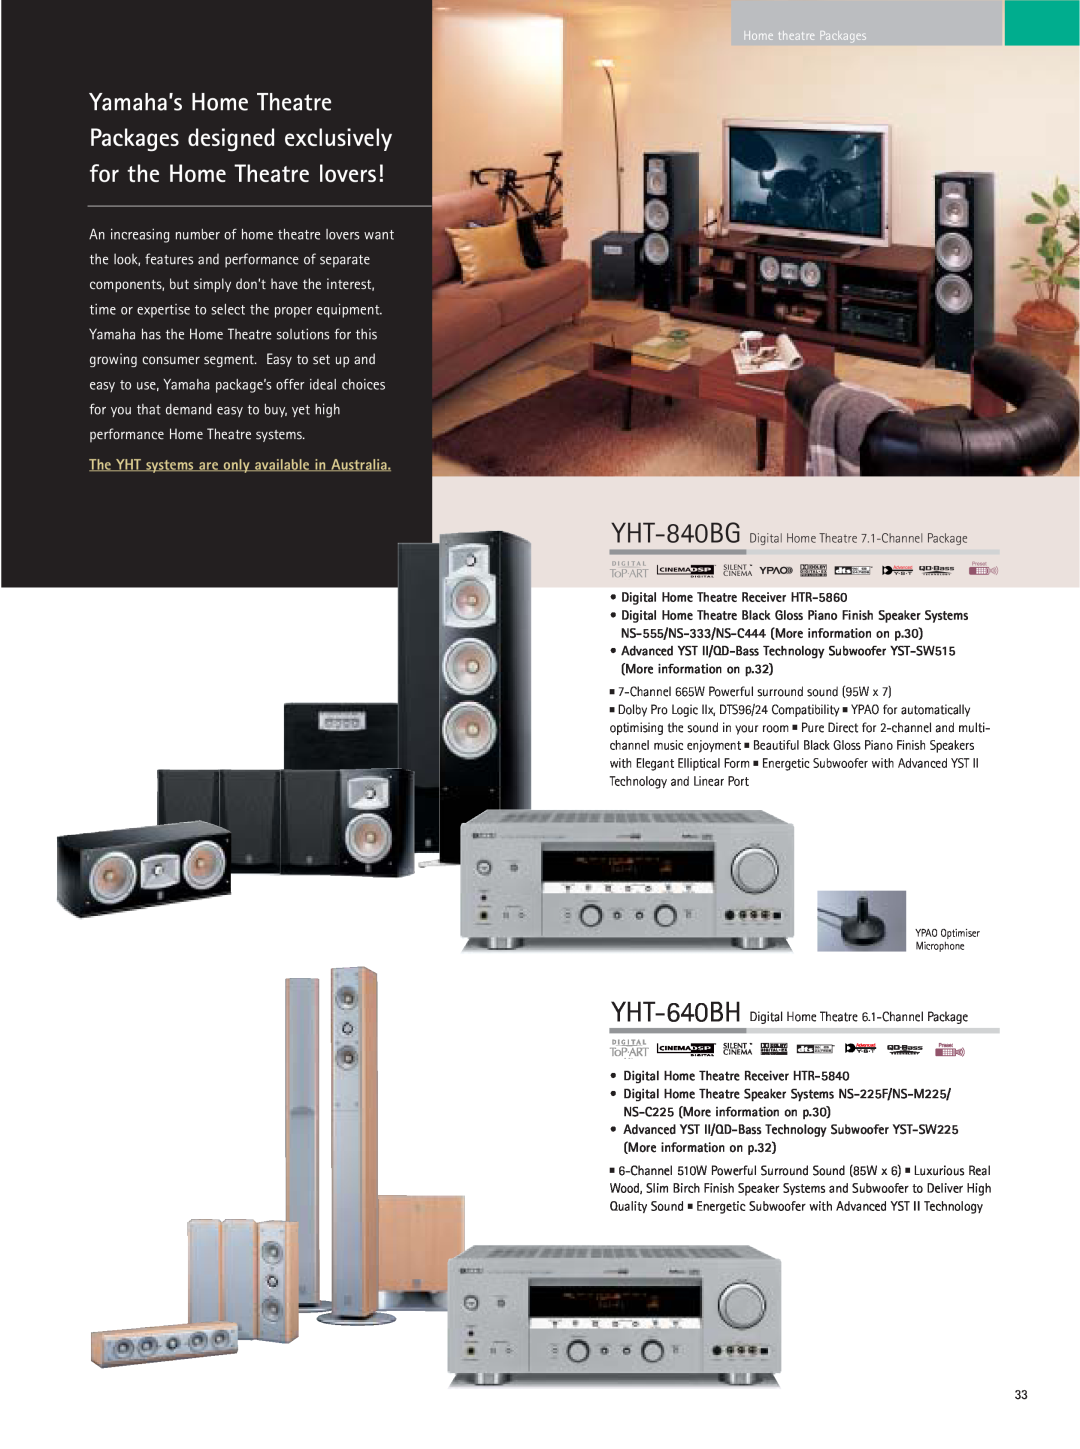 Yamaha RX-Z9 Yamaha’s Home Theatre, Packages designed exclusively, for the Home Theatre lovers, Home theatre Packages 